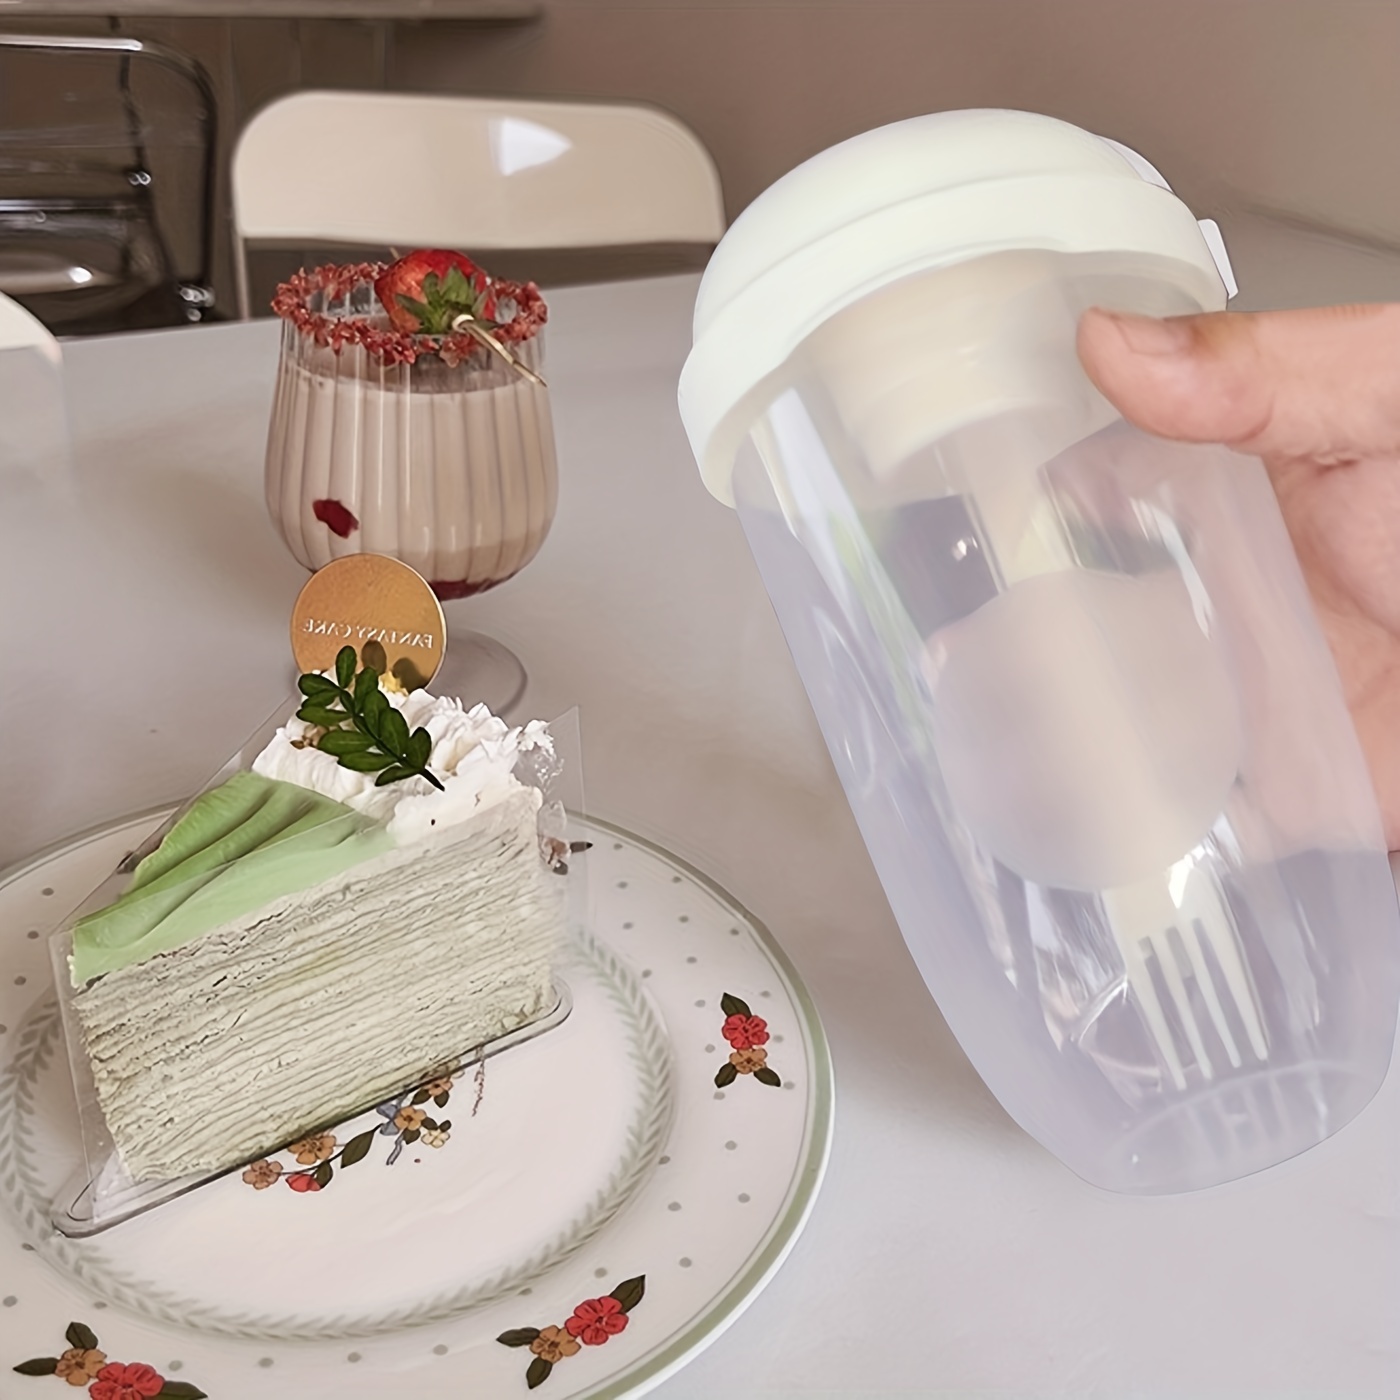 Salad Cup with Fork Transparent Salad Cup Portable Salad Cup with